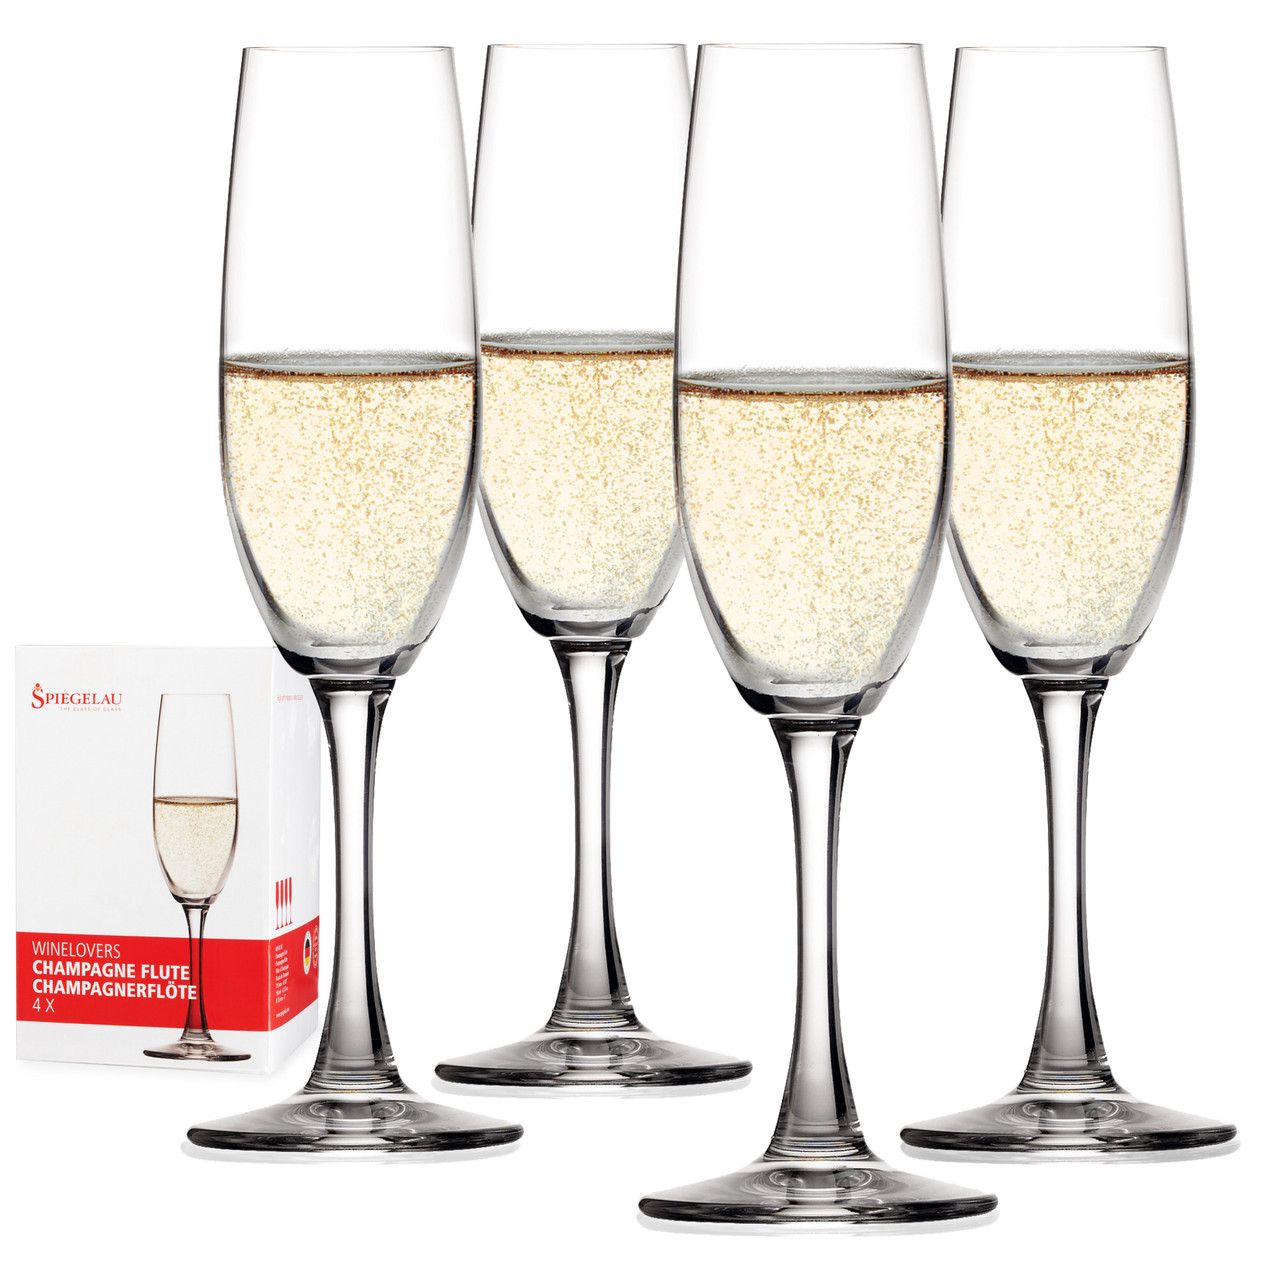 https://cdn11.bigcommerce.com/s-oo0gdojvjo/images/stencil/1280x1280/products/68552/100695/spiegelau-wine-lovers-6-7-oz-champagne-flutes-set-of-4__87068.1683777506.jpg?c=2&imbypass=on